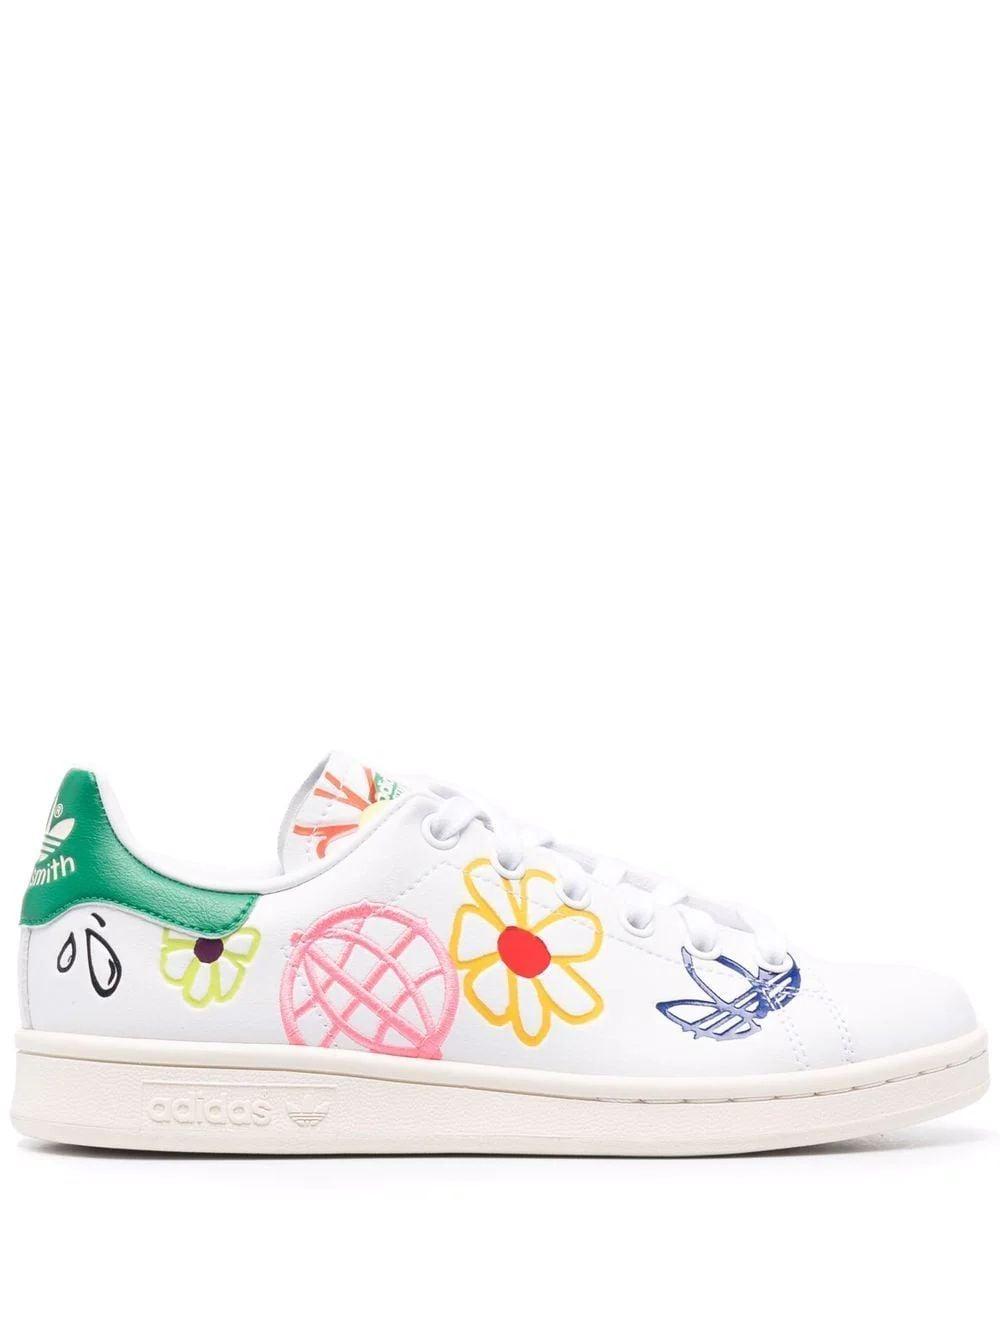 adidas Leather Stan Smith Graffiti-print Sneakers in White | Lyst